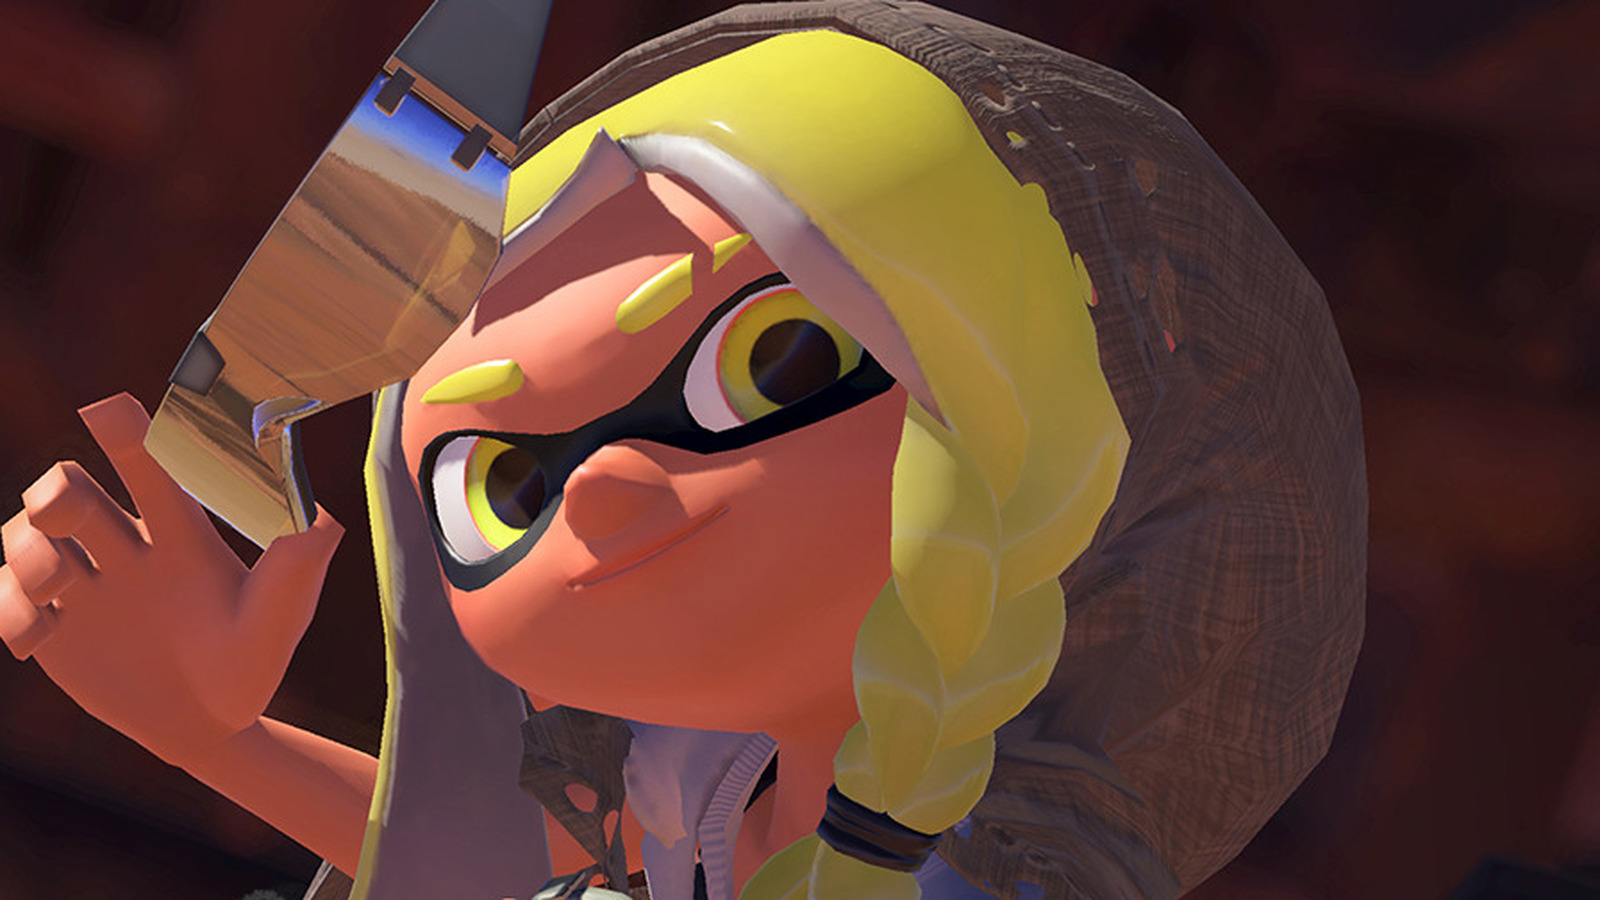 Splatoon 3 Release Date, Trailer, And Gameplay - What We Know So Far